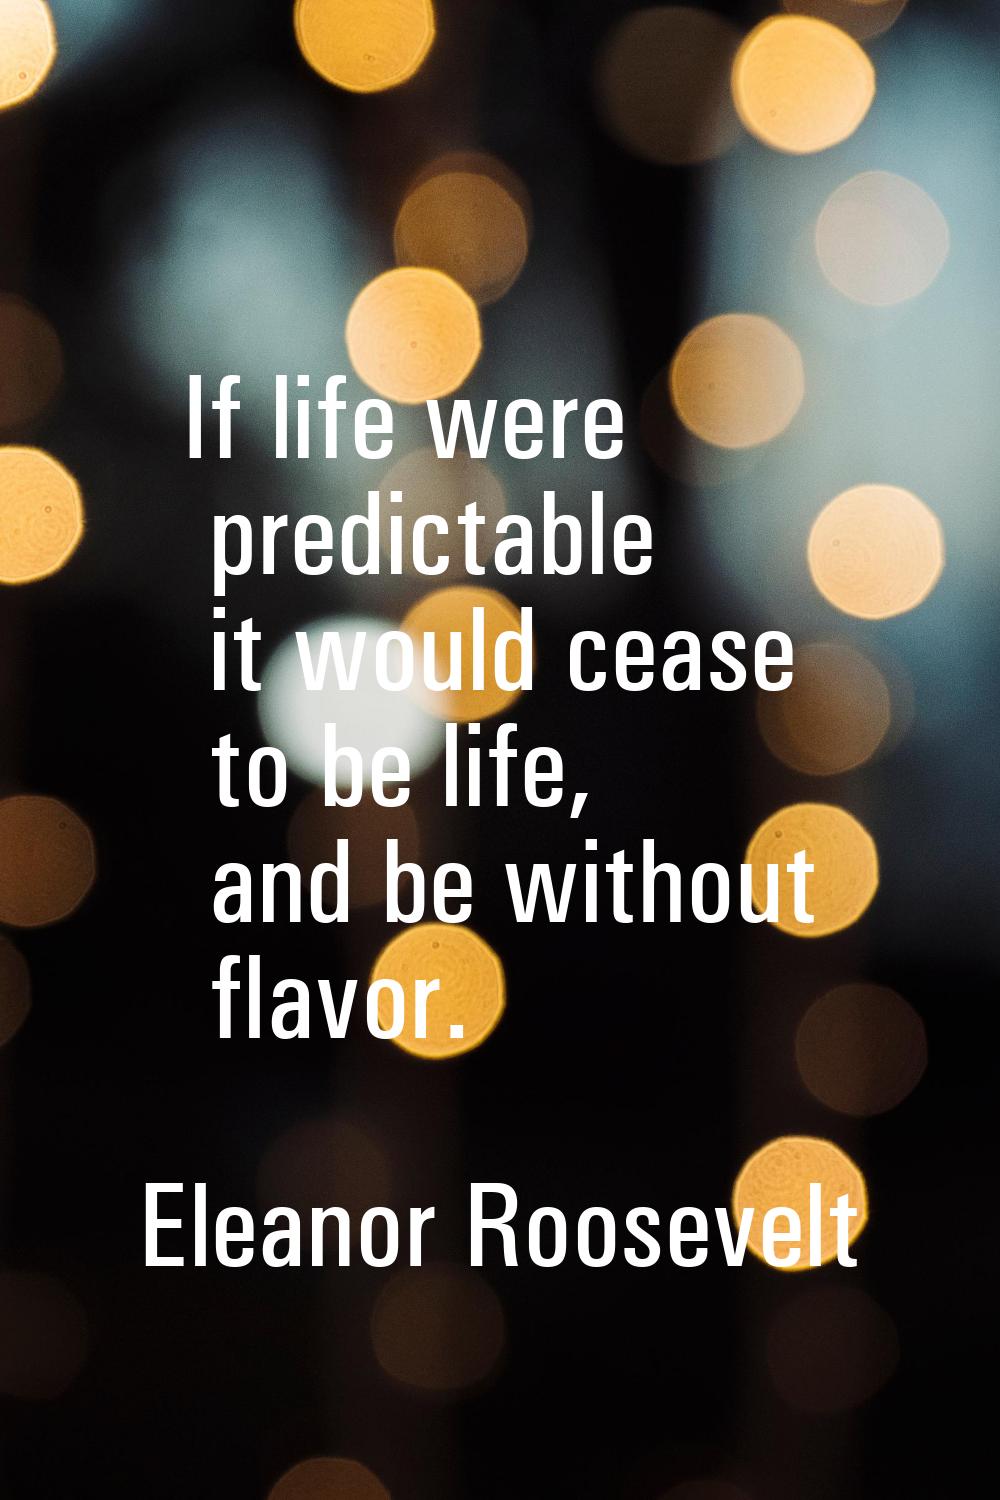 If life were predictable it would cease to be life, and be without flavor.